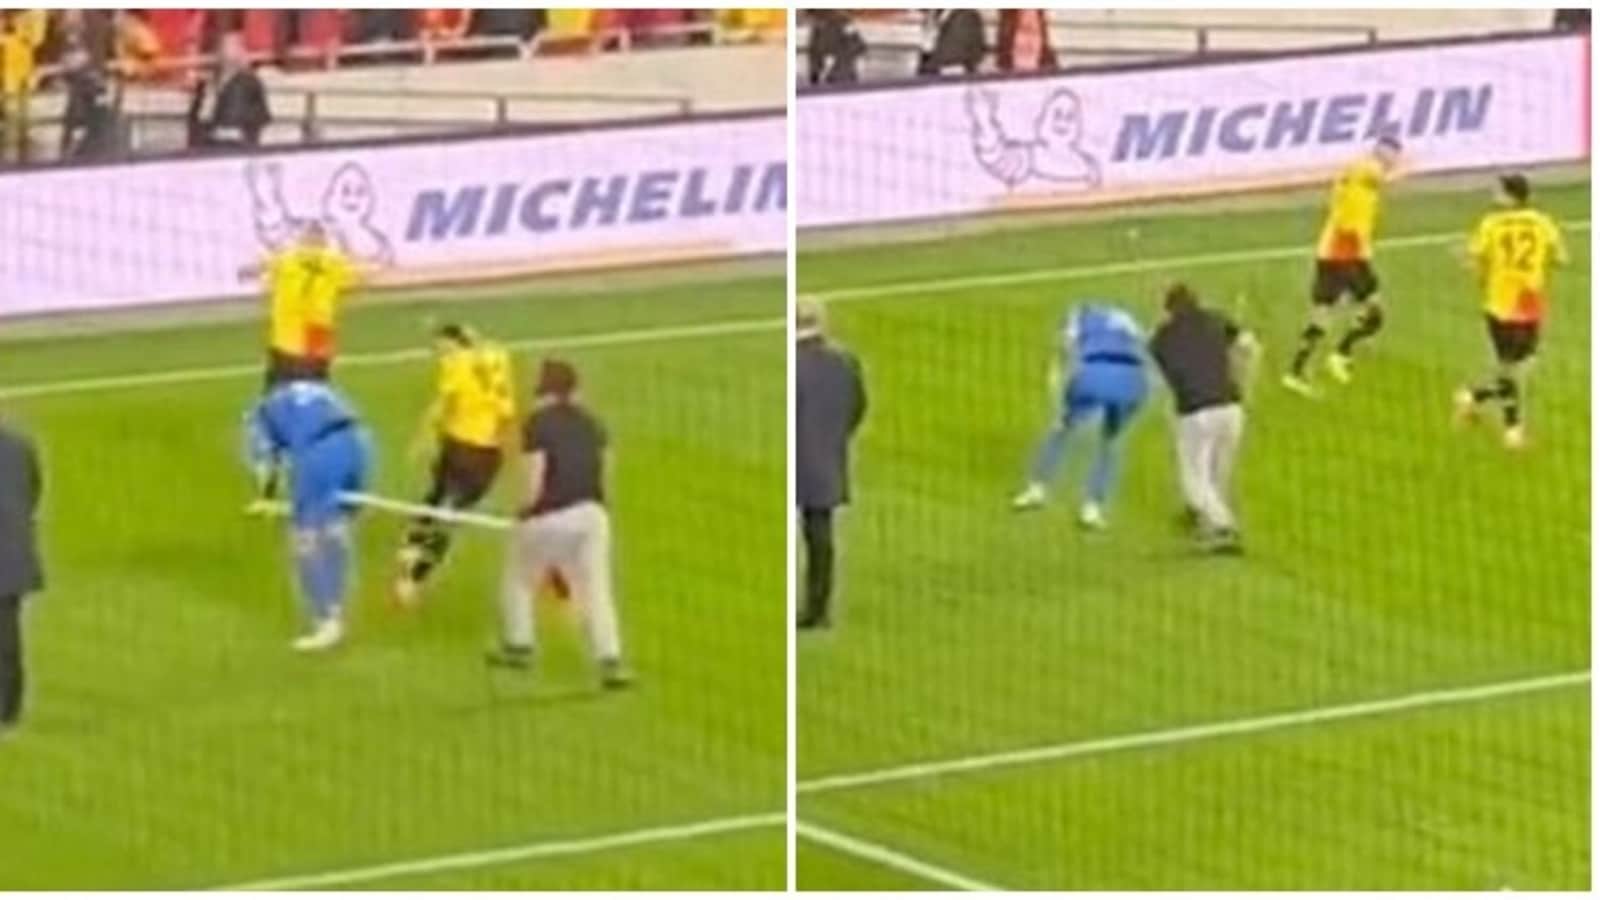 Watch: Fan attacks goalkeeper with corner flag during live match in Turkey, suffers hemorrhage